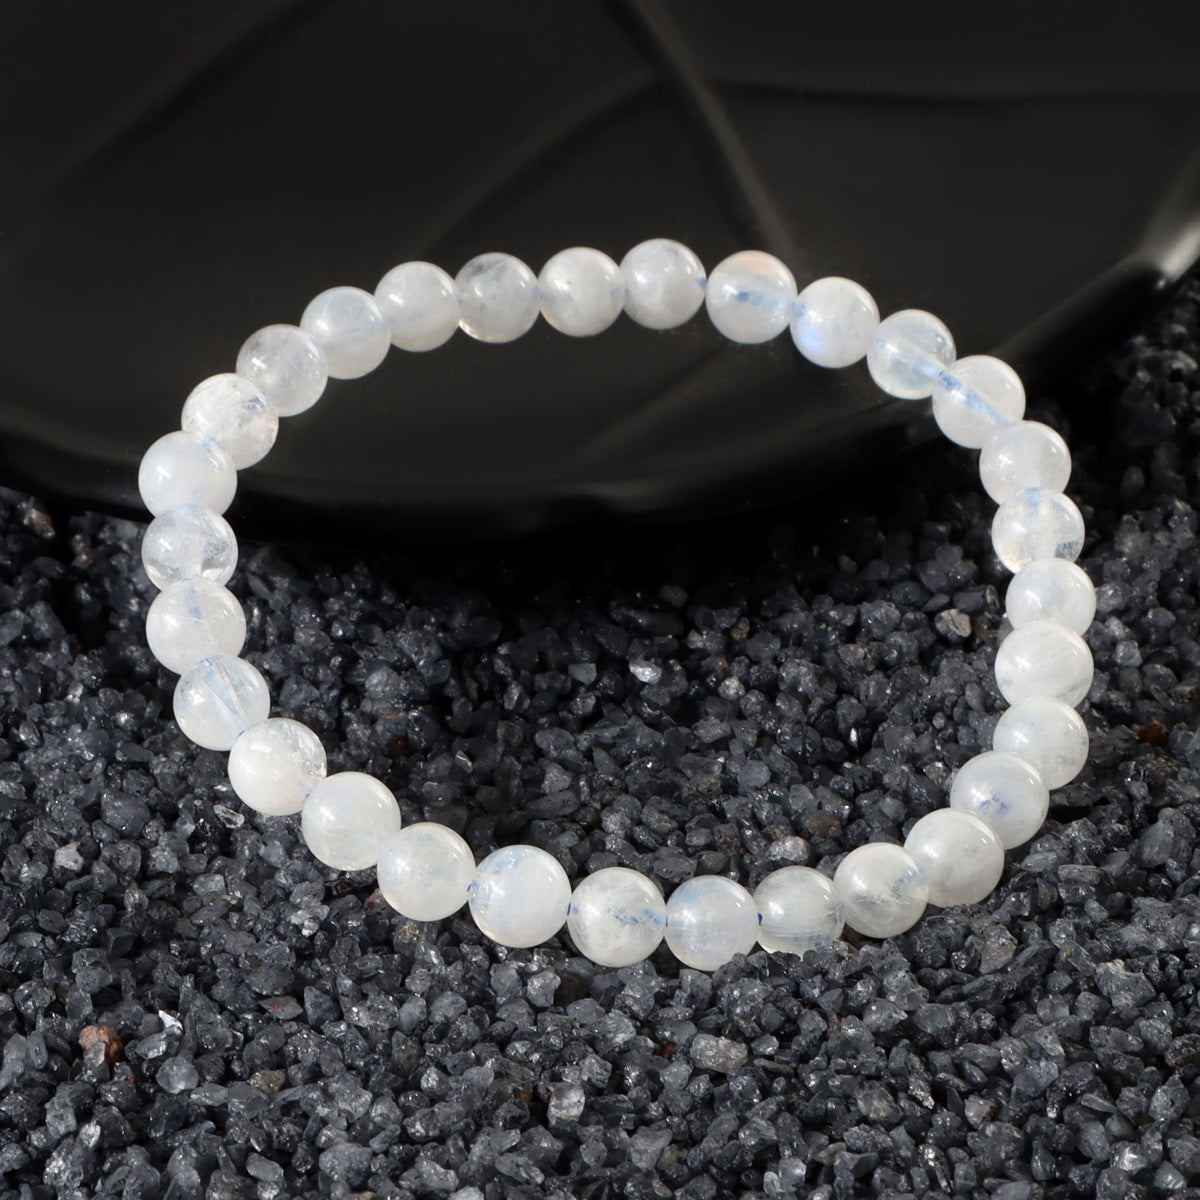 Detailed view of a 6mm Rainbow Moonstone bead, showcasing the iridescent hues and ethereal qualities in the bracelet